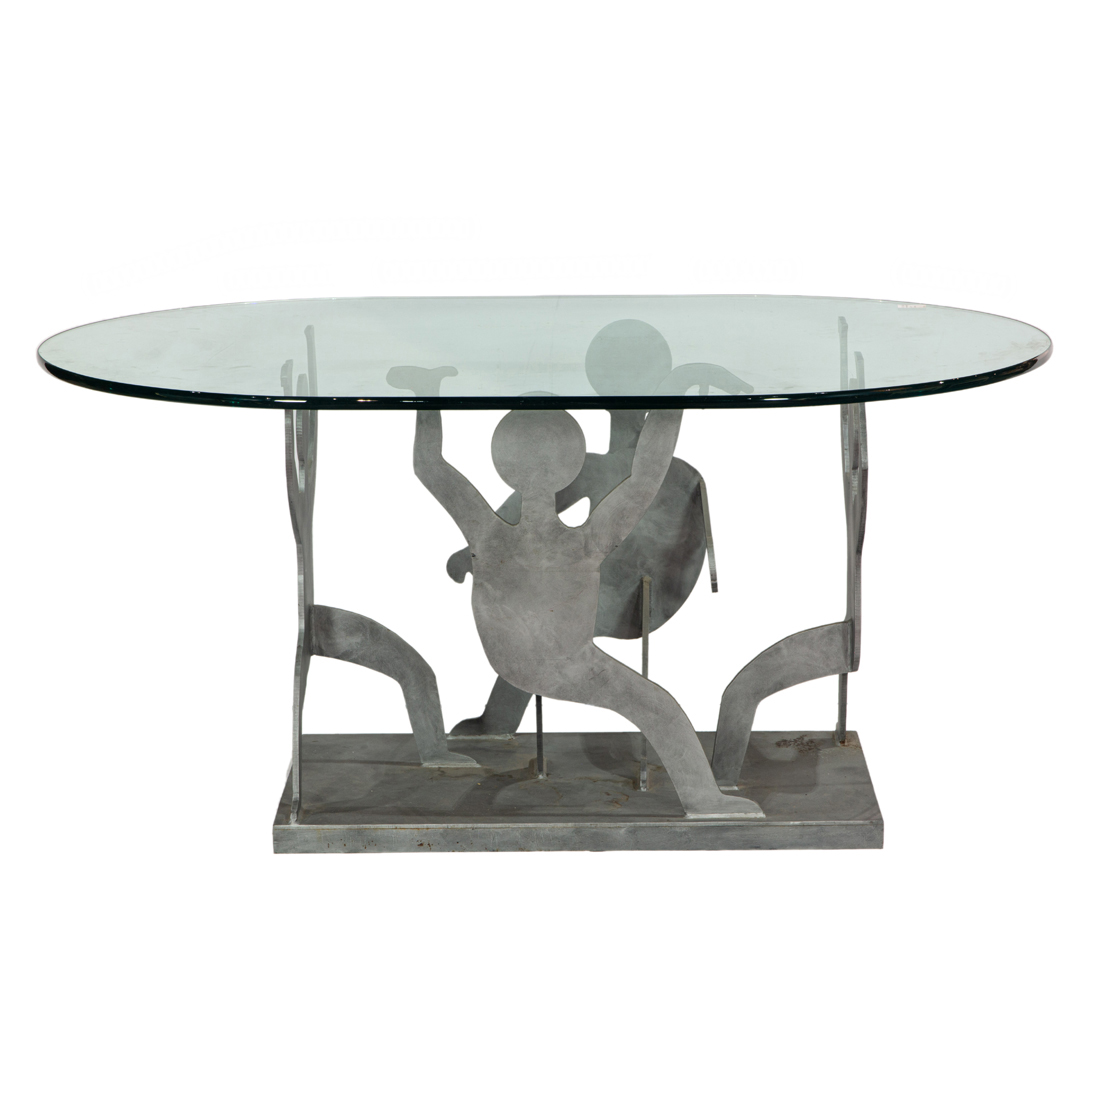 CONTEMPORARY DINING TABLE Contemporary 3a0d91